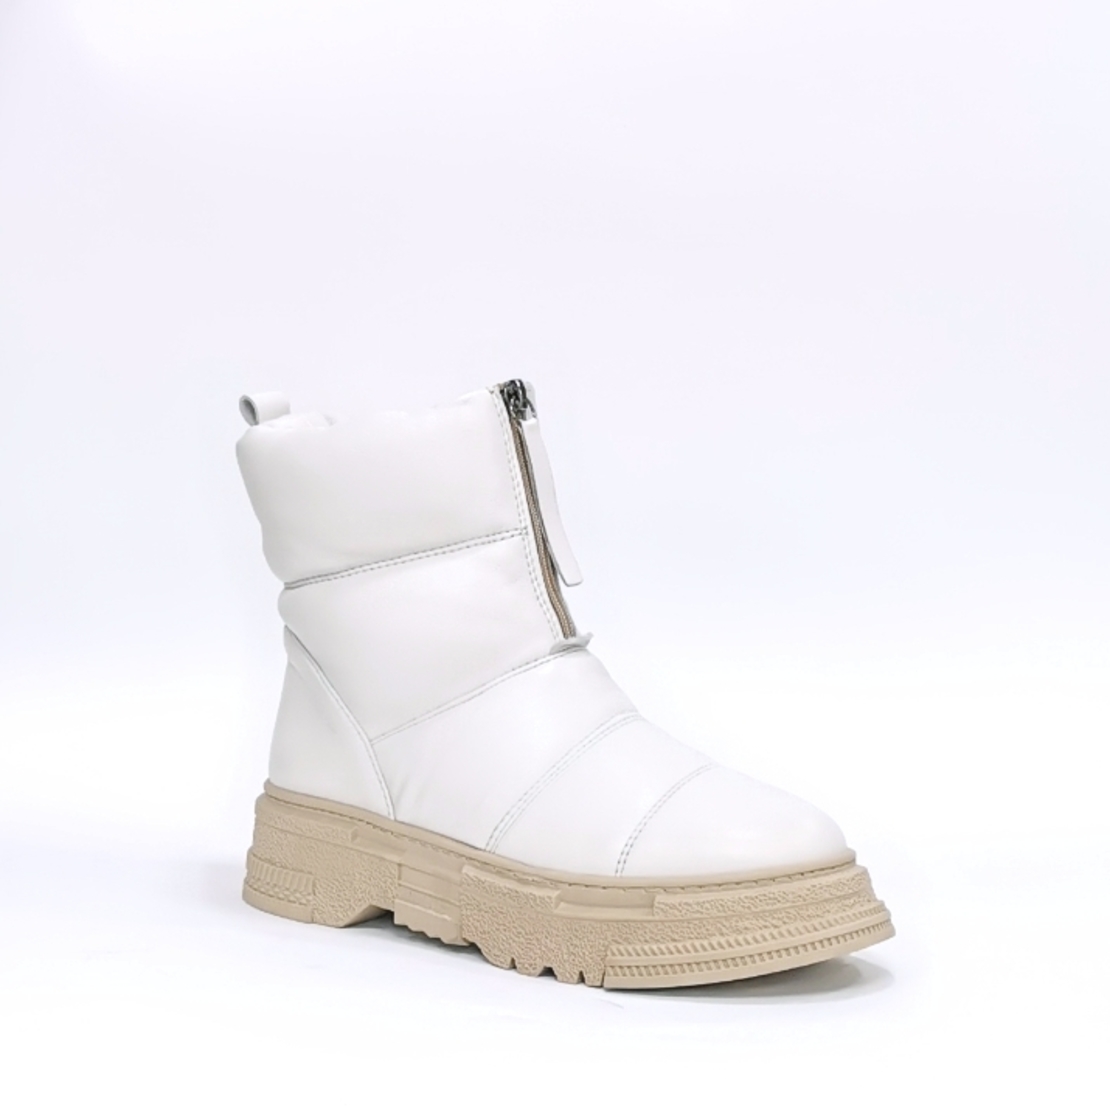 Women's casual boots made of natural leather in beige color/740